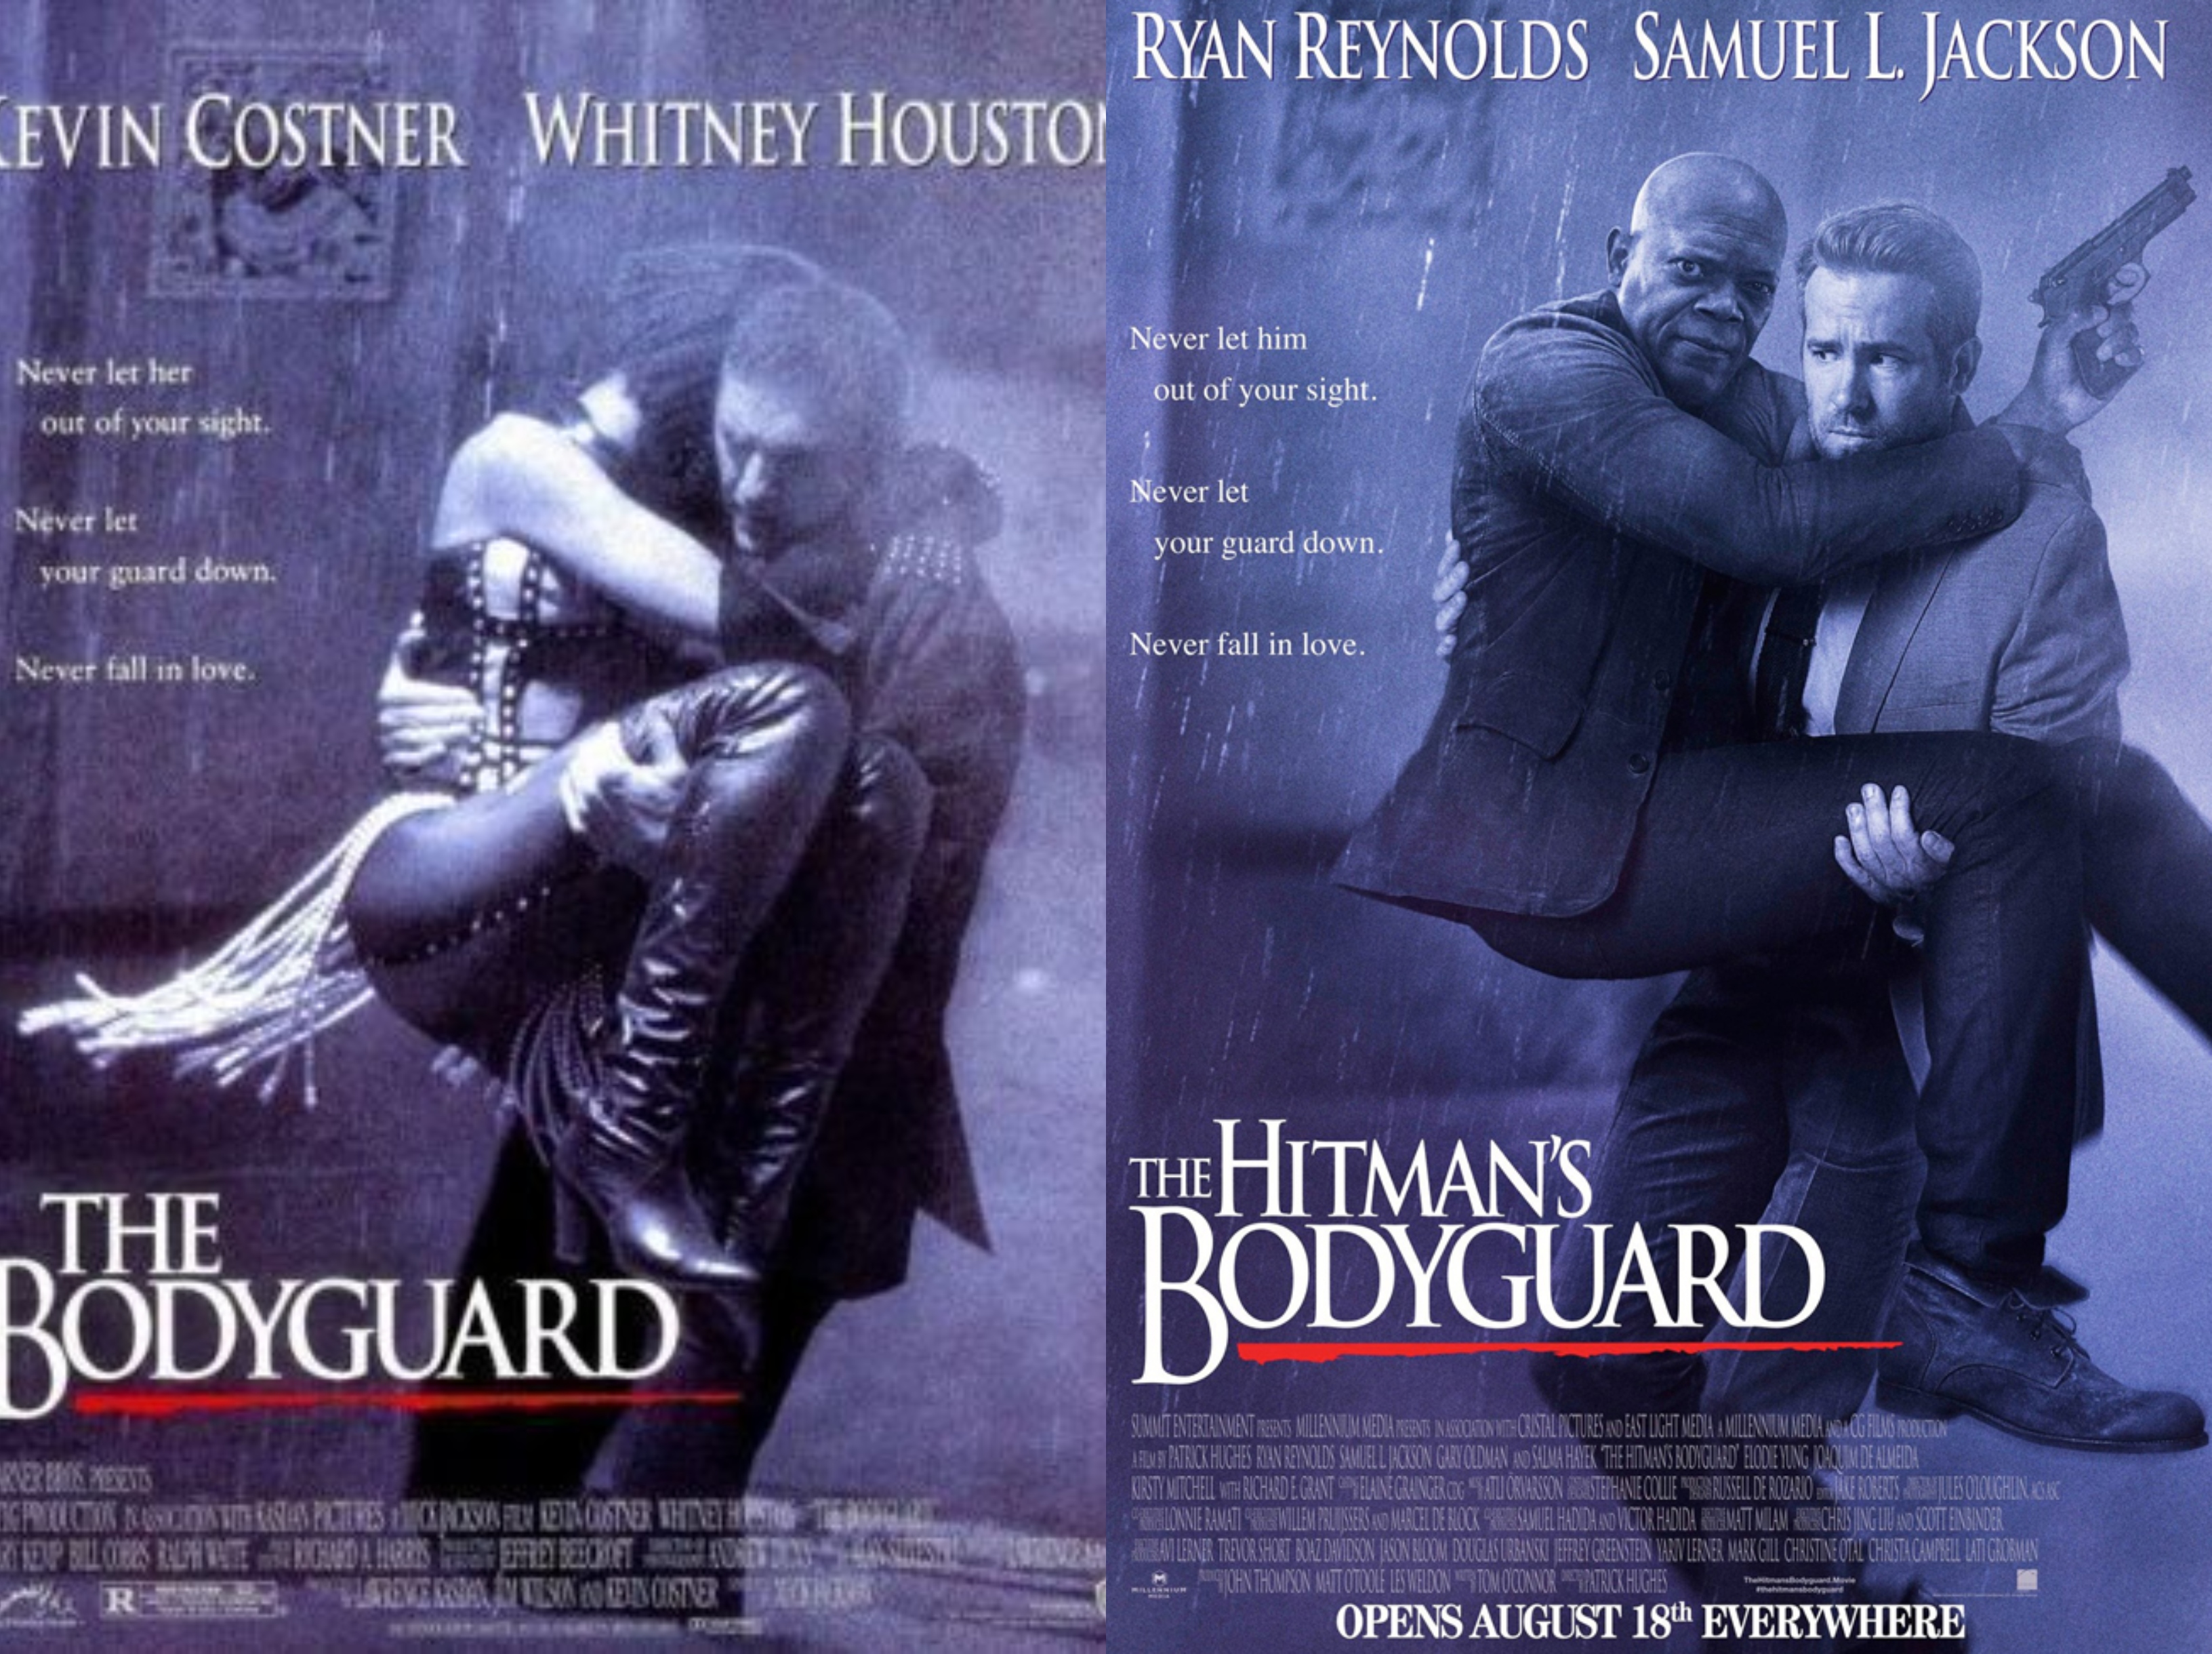 Posters for The Bodyguard and The Hitman's Bodyguard